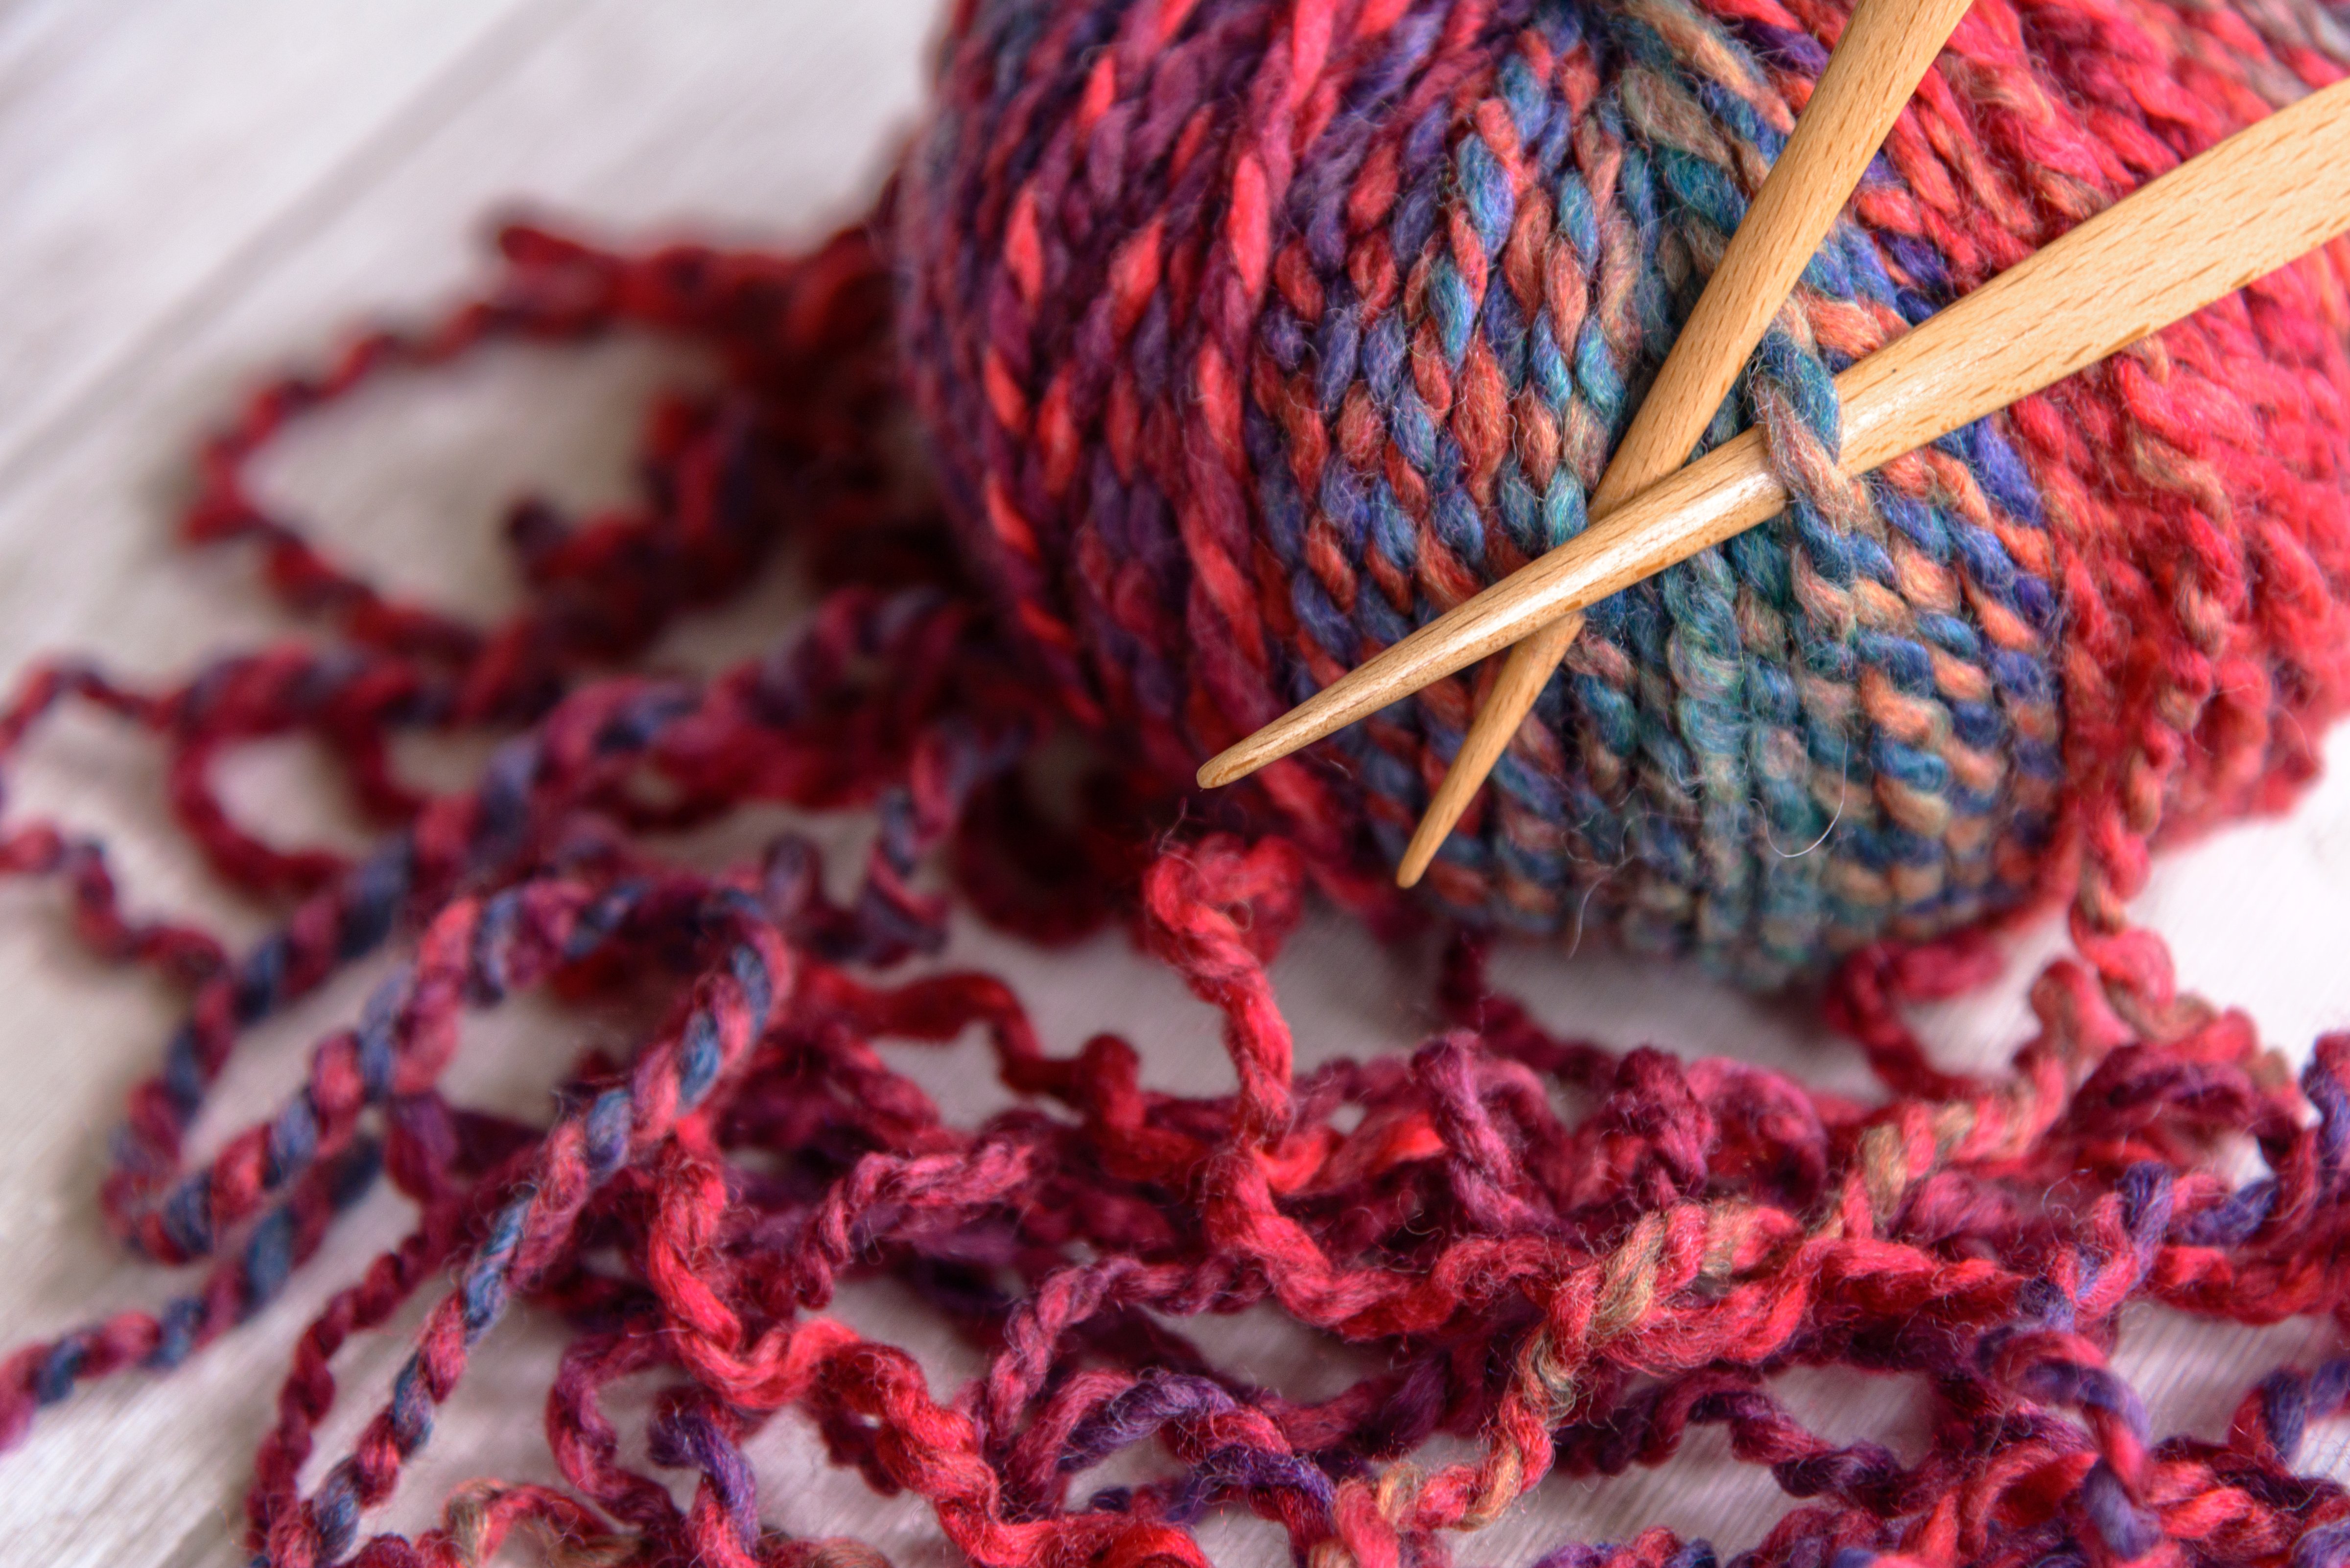 Popular knitting website Ravelry has banned posts in support of Donald Trump. (daria_miroshnikova—Getty Images/iStockphoto)